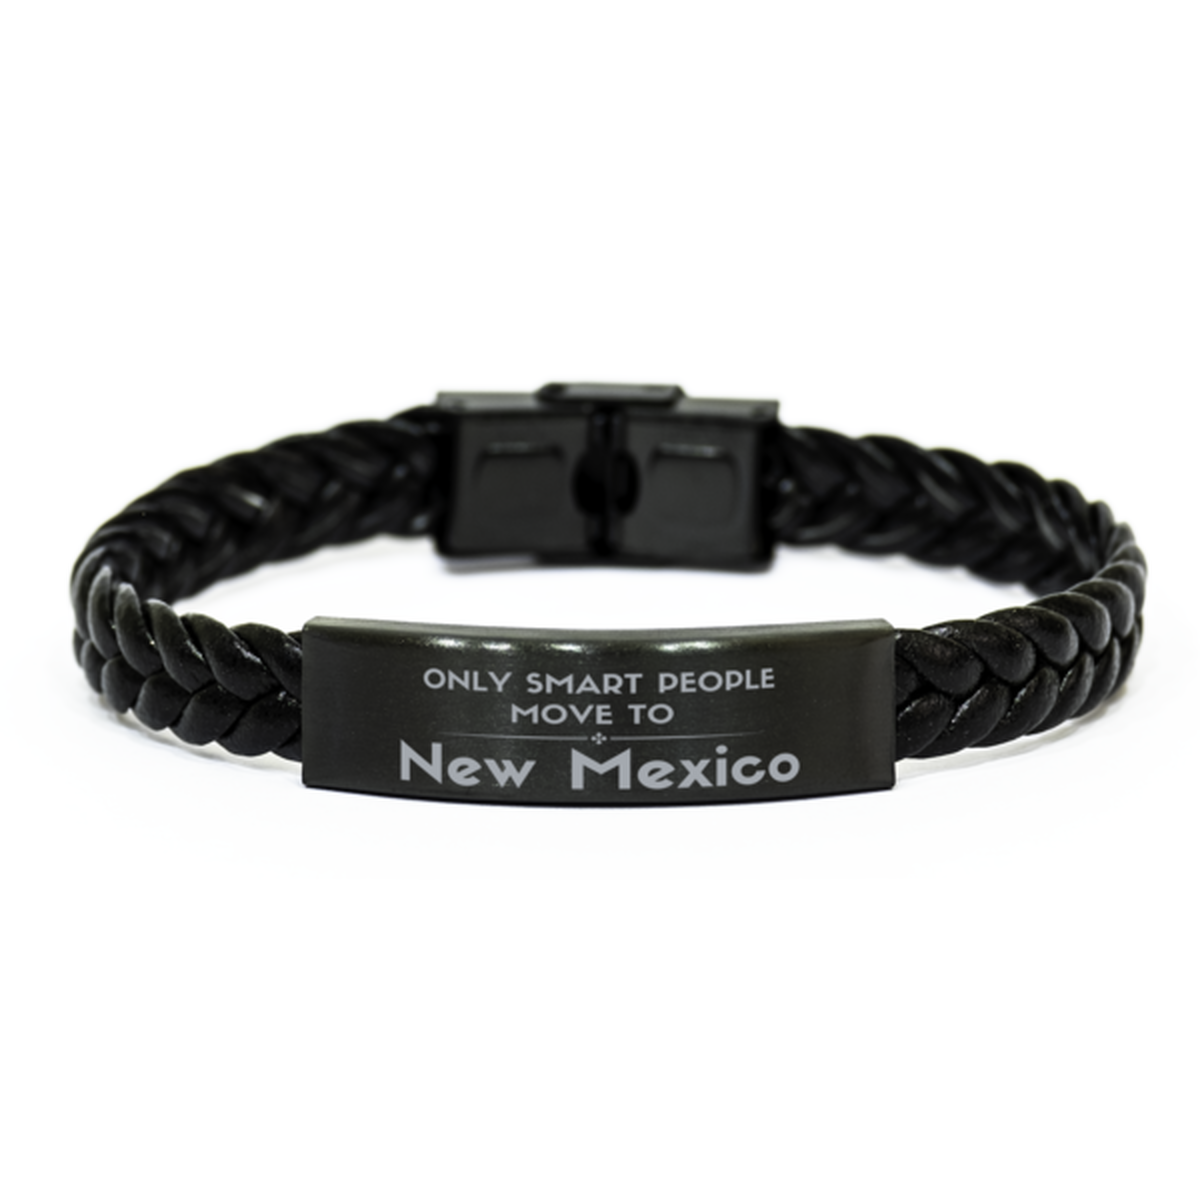 Only smart people move to New Mexico Braided Leather Bracelet, Gag Gifts For New Mexico, Move to New Mexico Gifts for Friends Coworker Funny Saying Quote